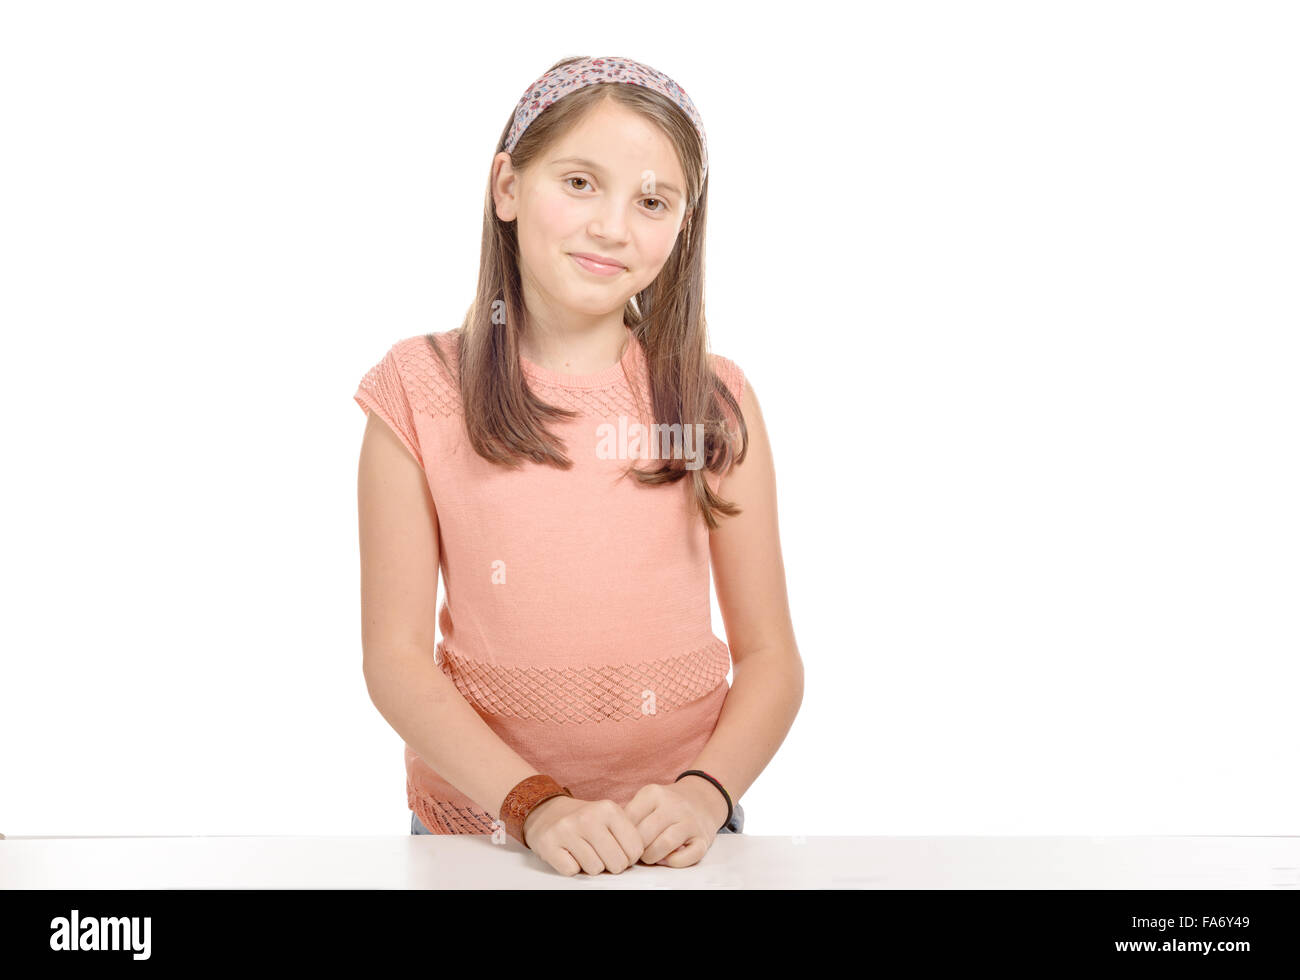 a beautiful young teenage girl smiling and looking into the camera Stock Photo